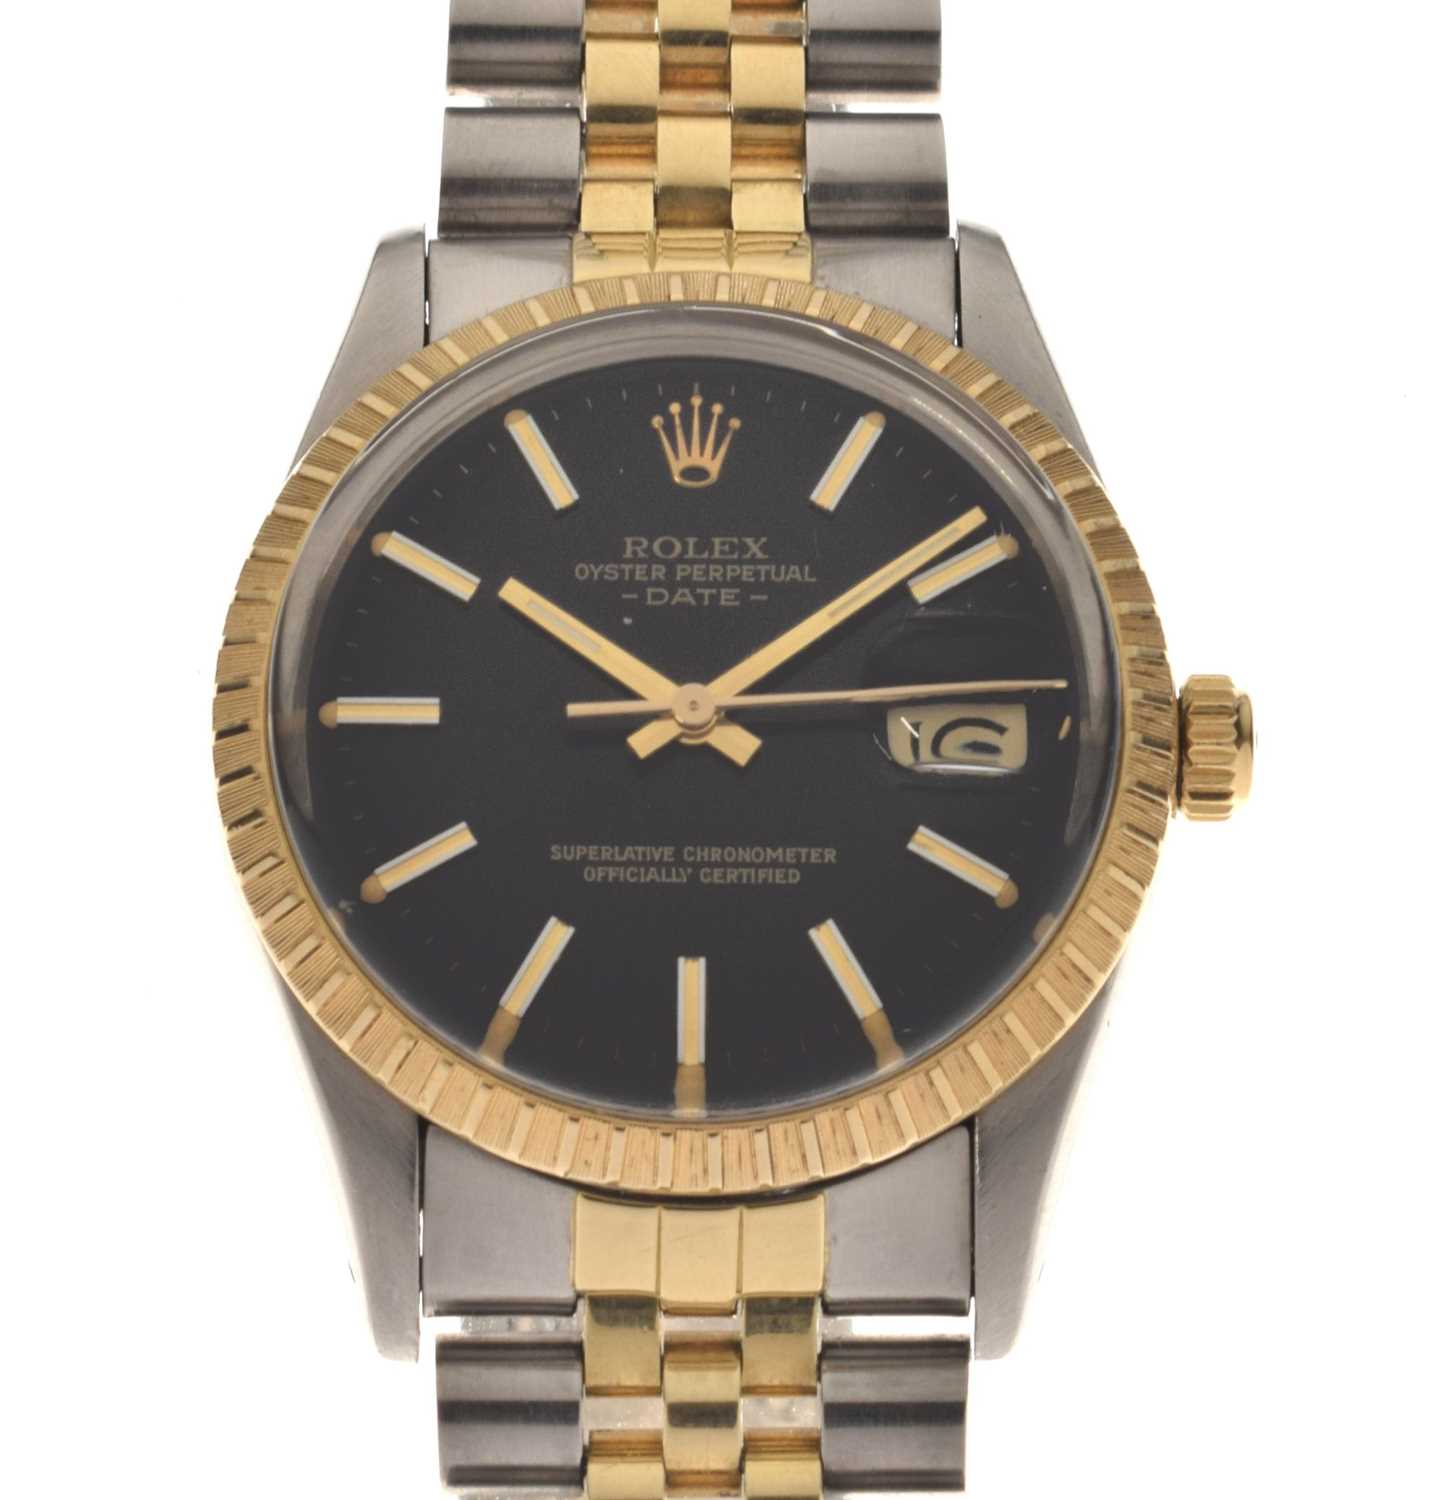 Rolex - Early 1980s Datejust Oyster Perpetual Superlative Chronometer